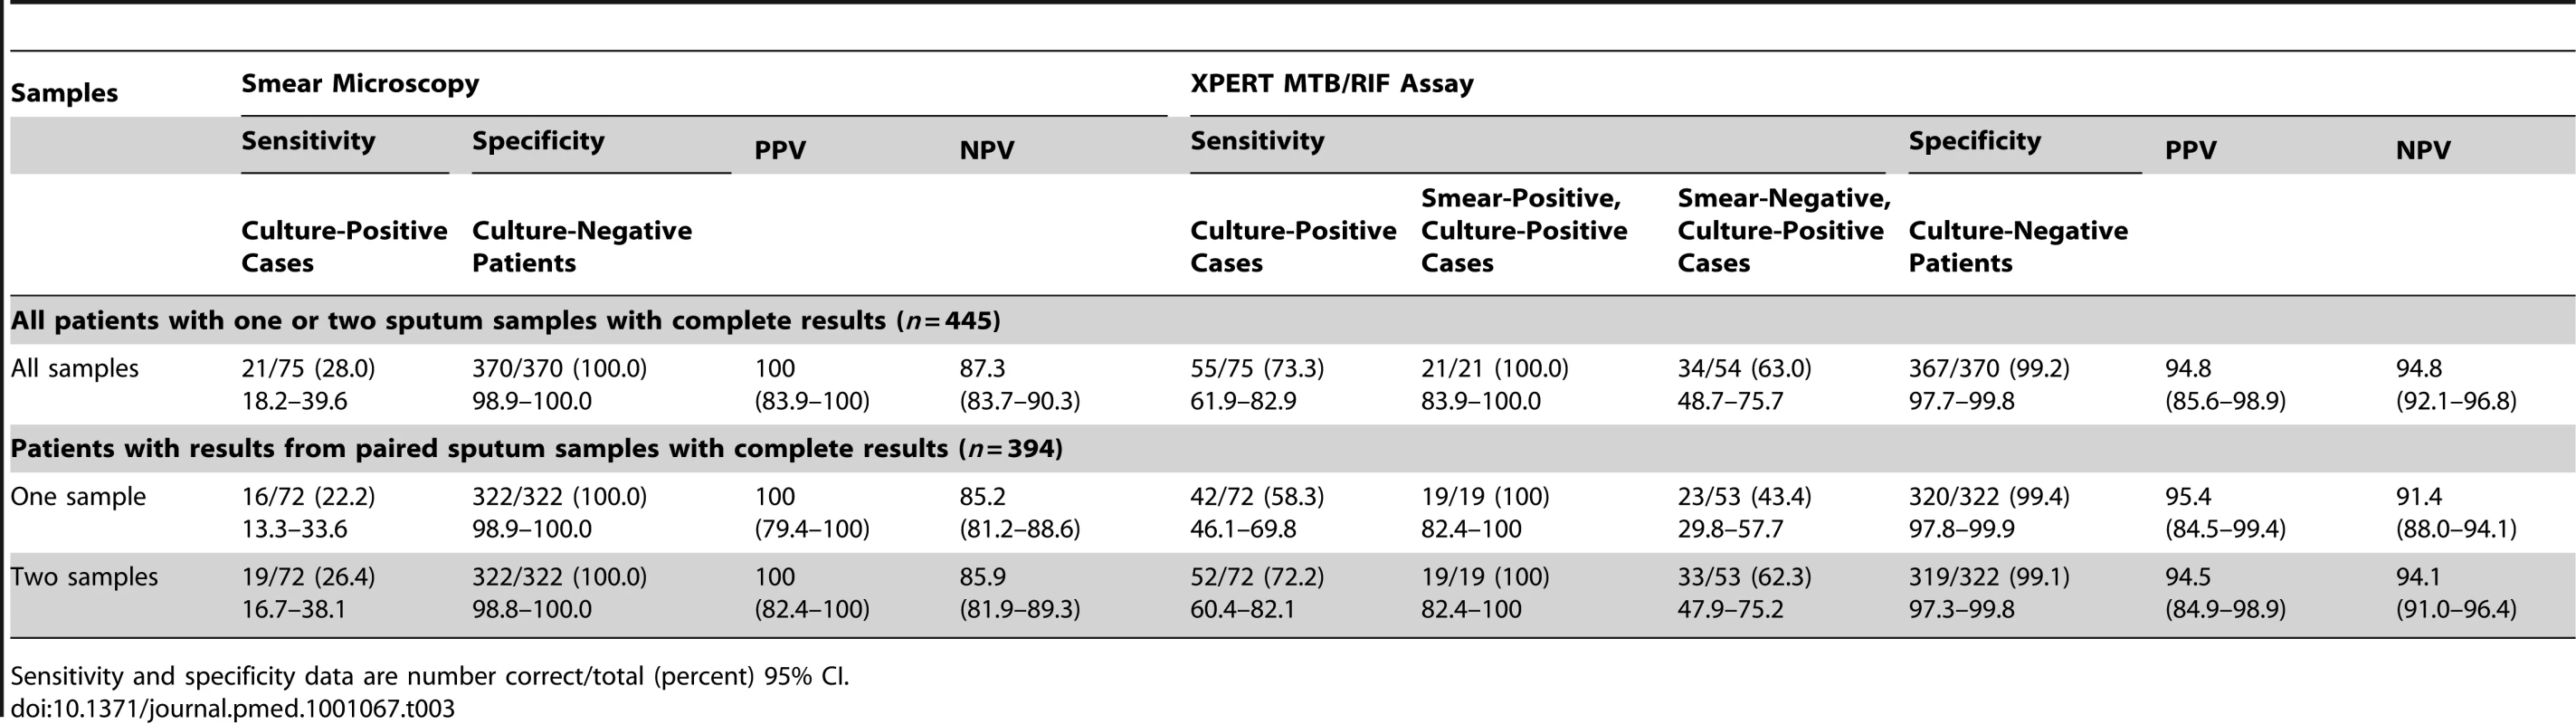 Per-patient analysis of data showing the sensitivity and specificity of the Xpert MTB/RIF assay for tuberculosis diagnosis compared to sputum smear microscopy, using sputum liquid culture as the gold standard.